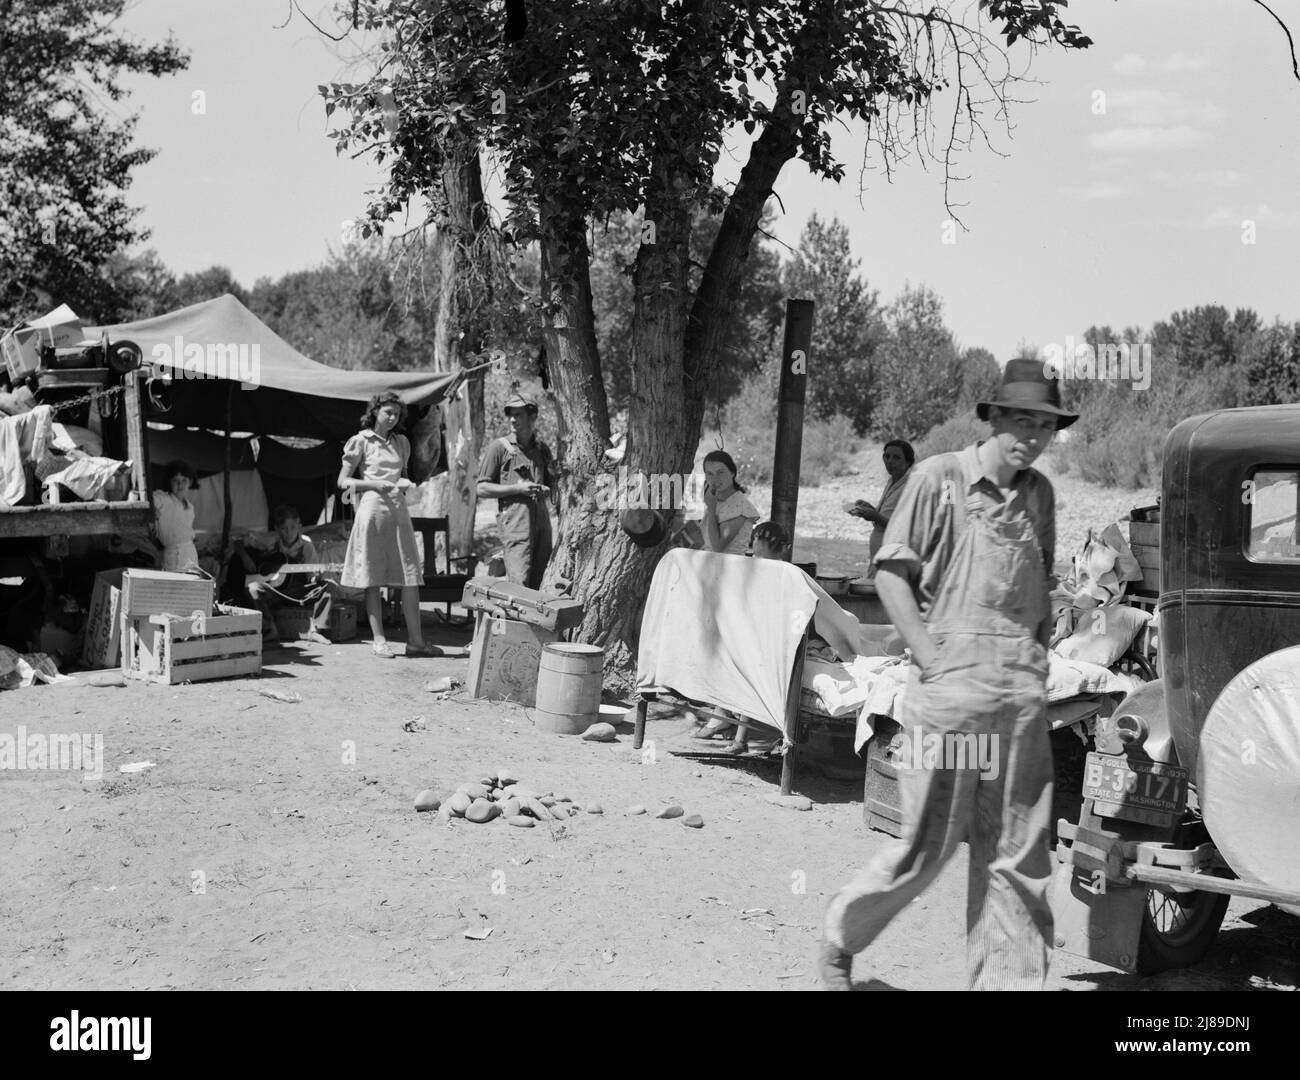 Washington, Yakima Valley. Camp of migratory families in &quot;Ramblers Park.&quot;. Stock Photo